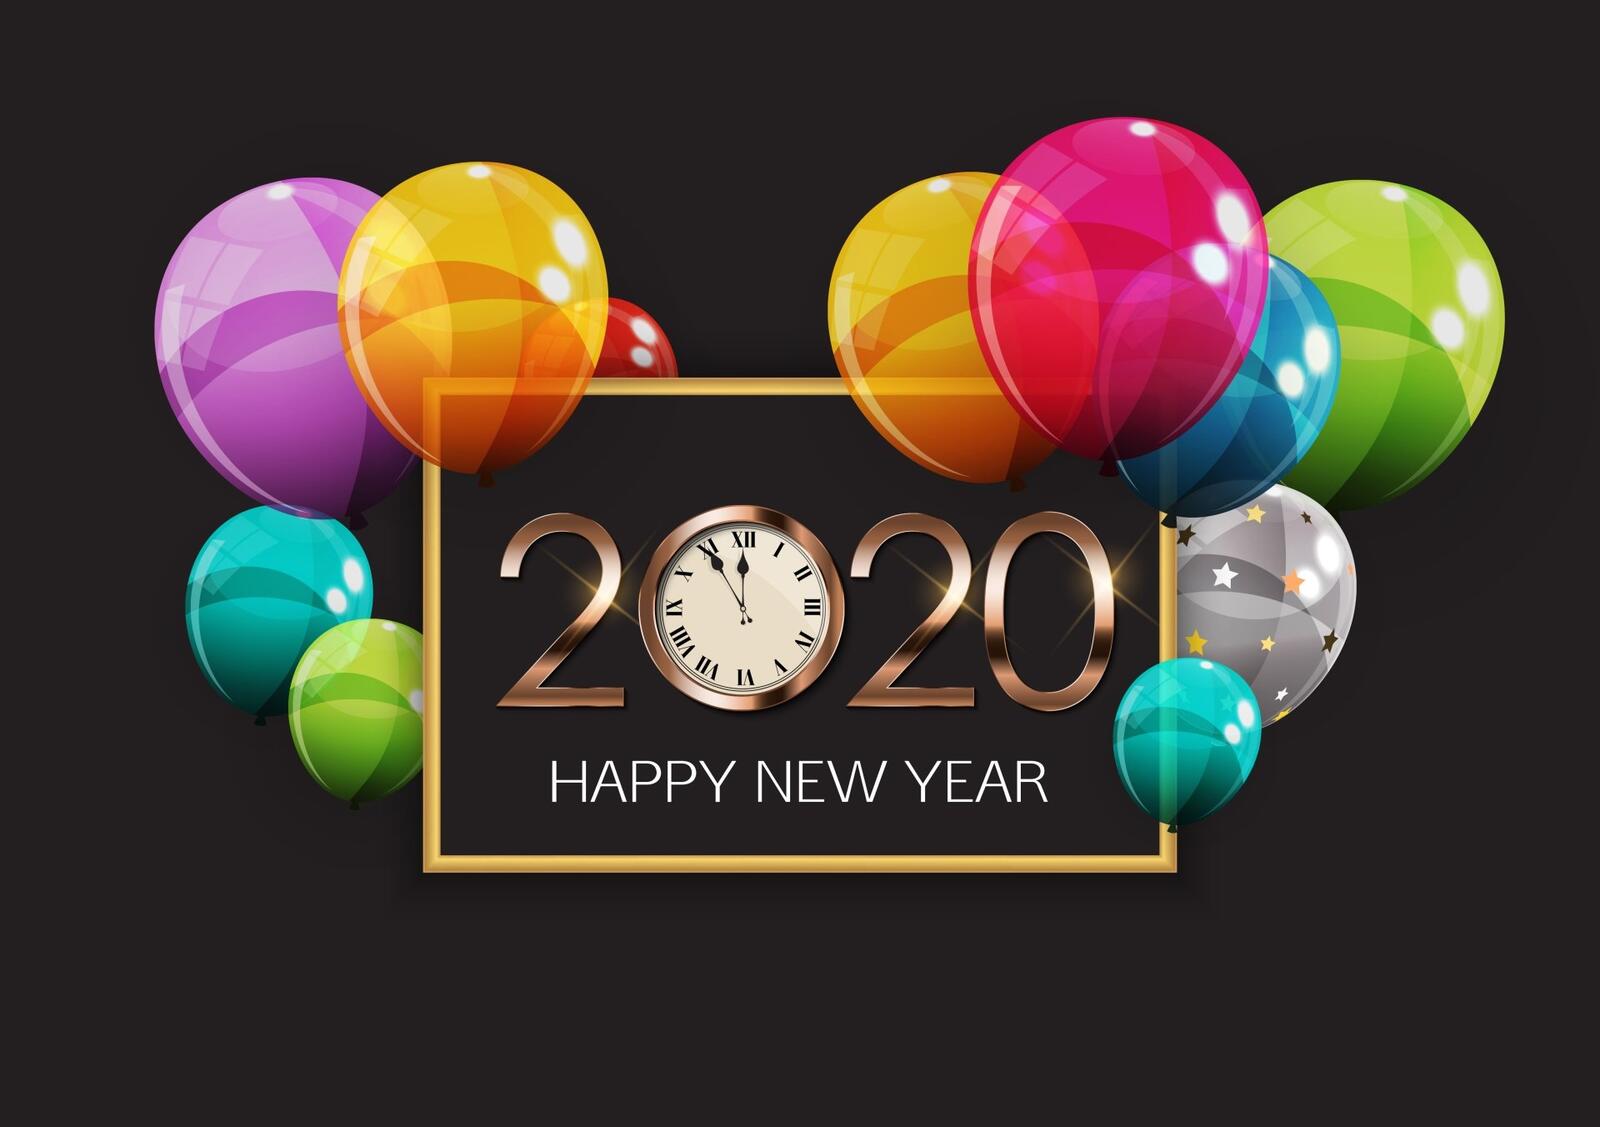 Wallpapers the new year 2020 bulbs frame on the desktop